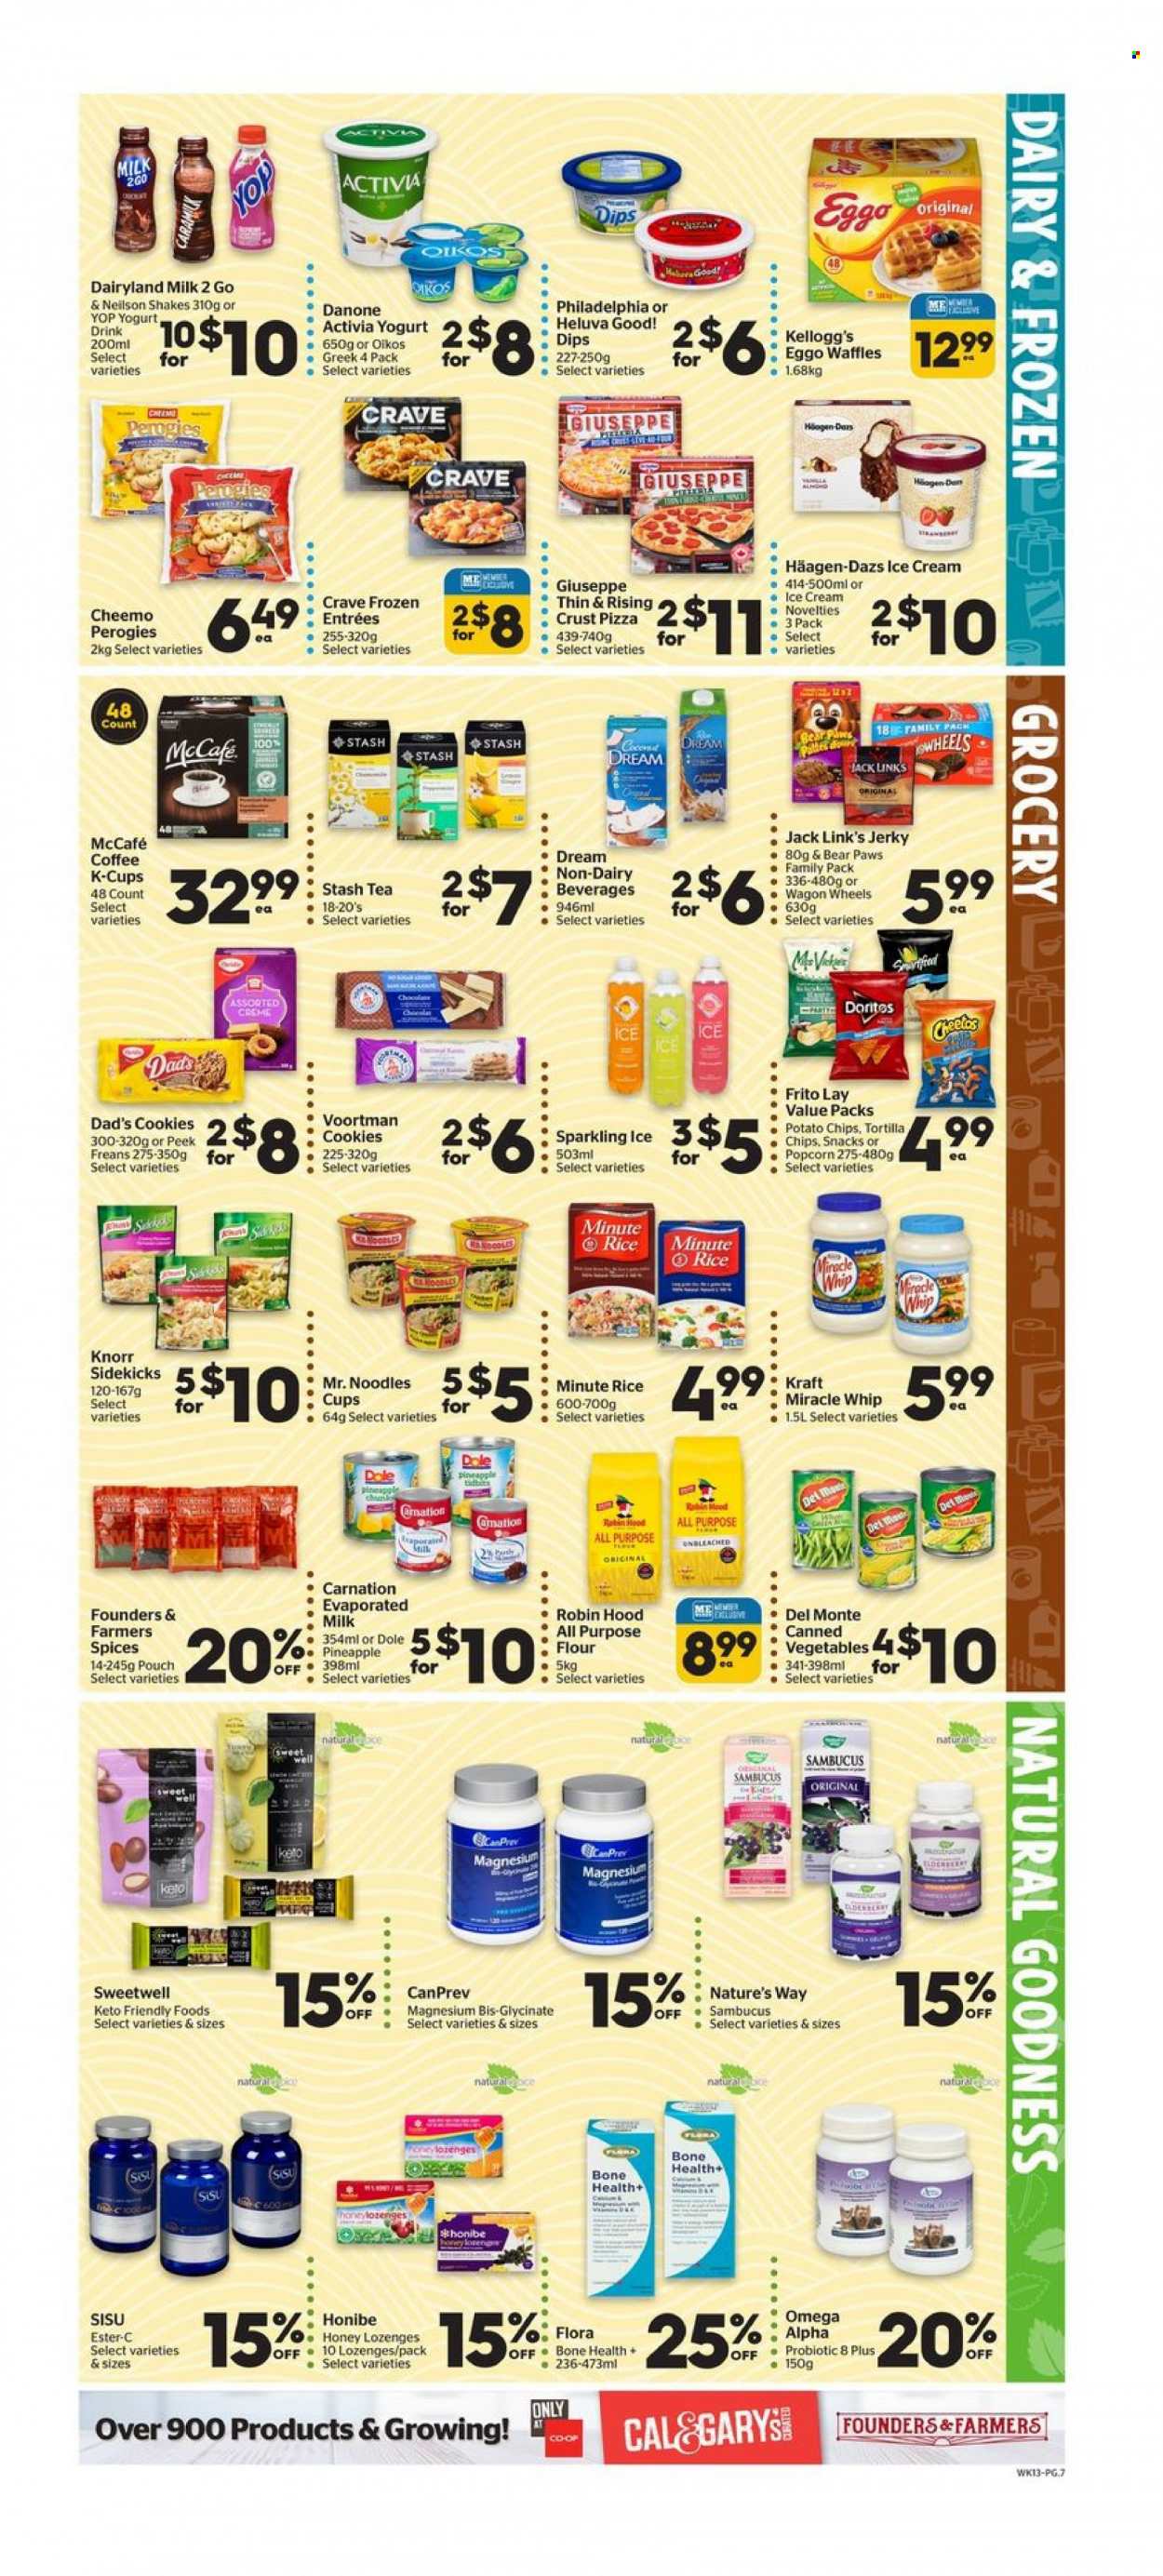 thumbnail - Calgary Co-op Flyer - January 26, 2023 - February 01, 2023 - Sales products - waffles, Dole, pineapple, pizza, noodles, Kraft®, jerky, yoghurt, Activia, Oikos, evaporated milk, shake, Flora, Miracle Whip, ice cream, Häagen-Dazs, cookies, snack, Kellogg's, tortilla chips, potato chips, Cheetos, popcorn, Jack Link's, all purpose flour, canned vegetables, Del Monte, rice, tea, coffee capsules, McCafe, K-Cups, Paws, Ester-c, magnesium, Philadelphia, Danone, Knorr. Page 9.